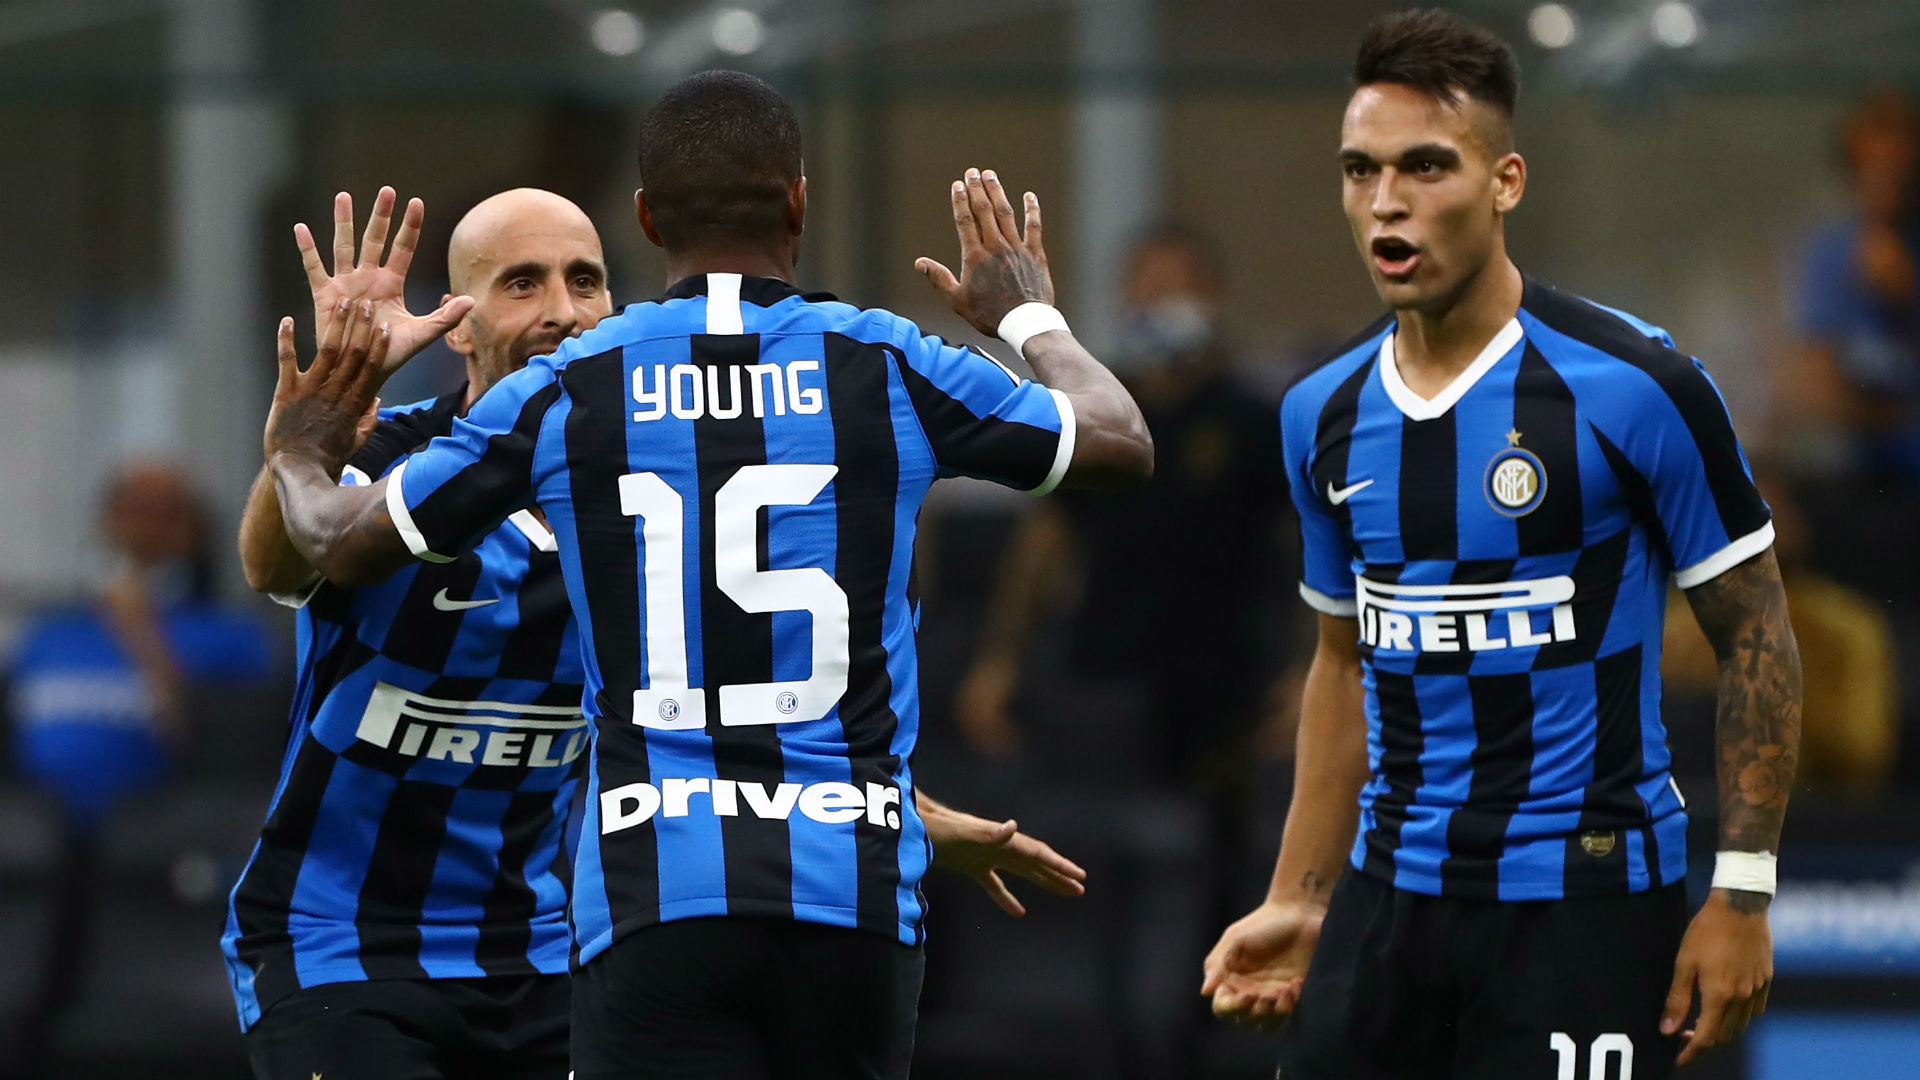 A superb second-half performance saw Inter move second in Serie A by beating Torino 3-1 at San Siro.